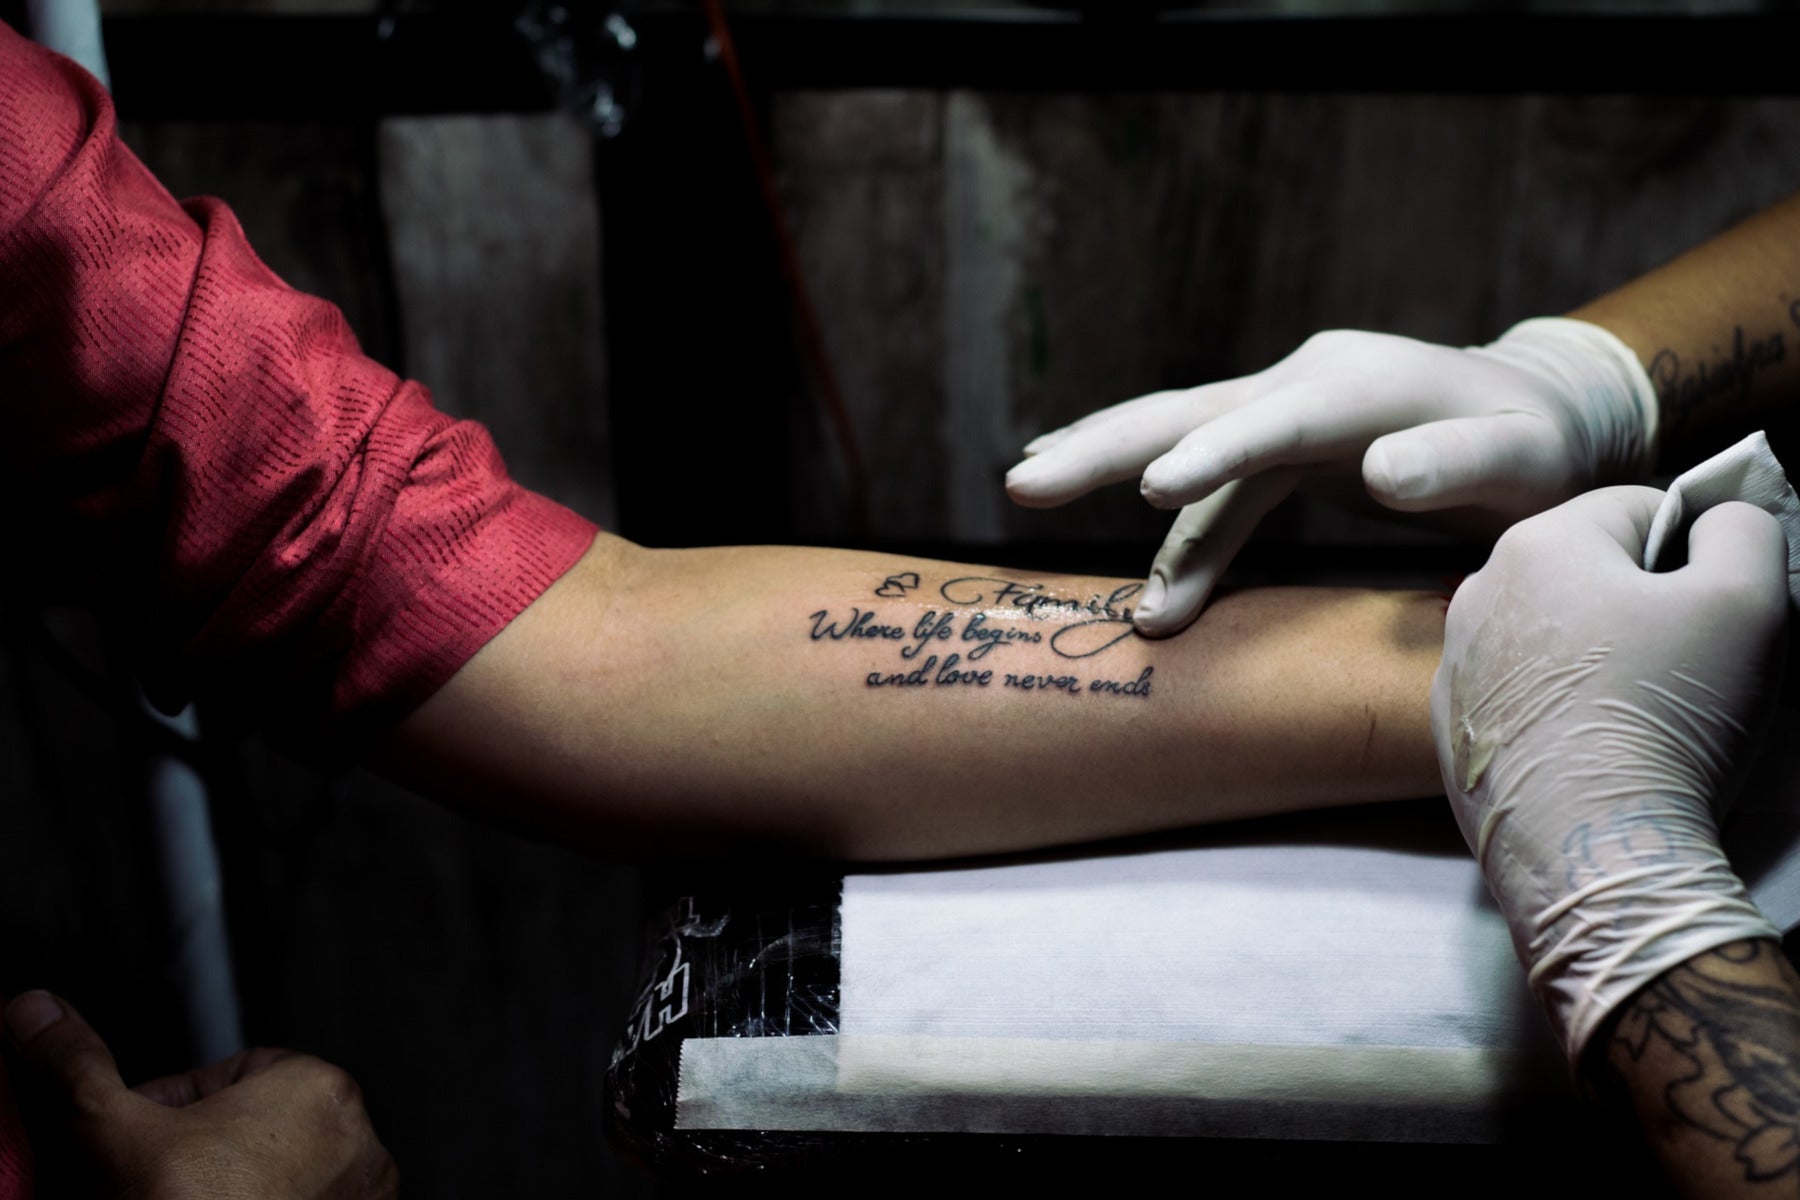 Tattoo aftercare in the monsoon that you need to know about - Times of India